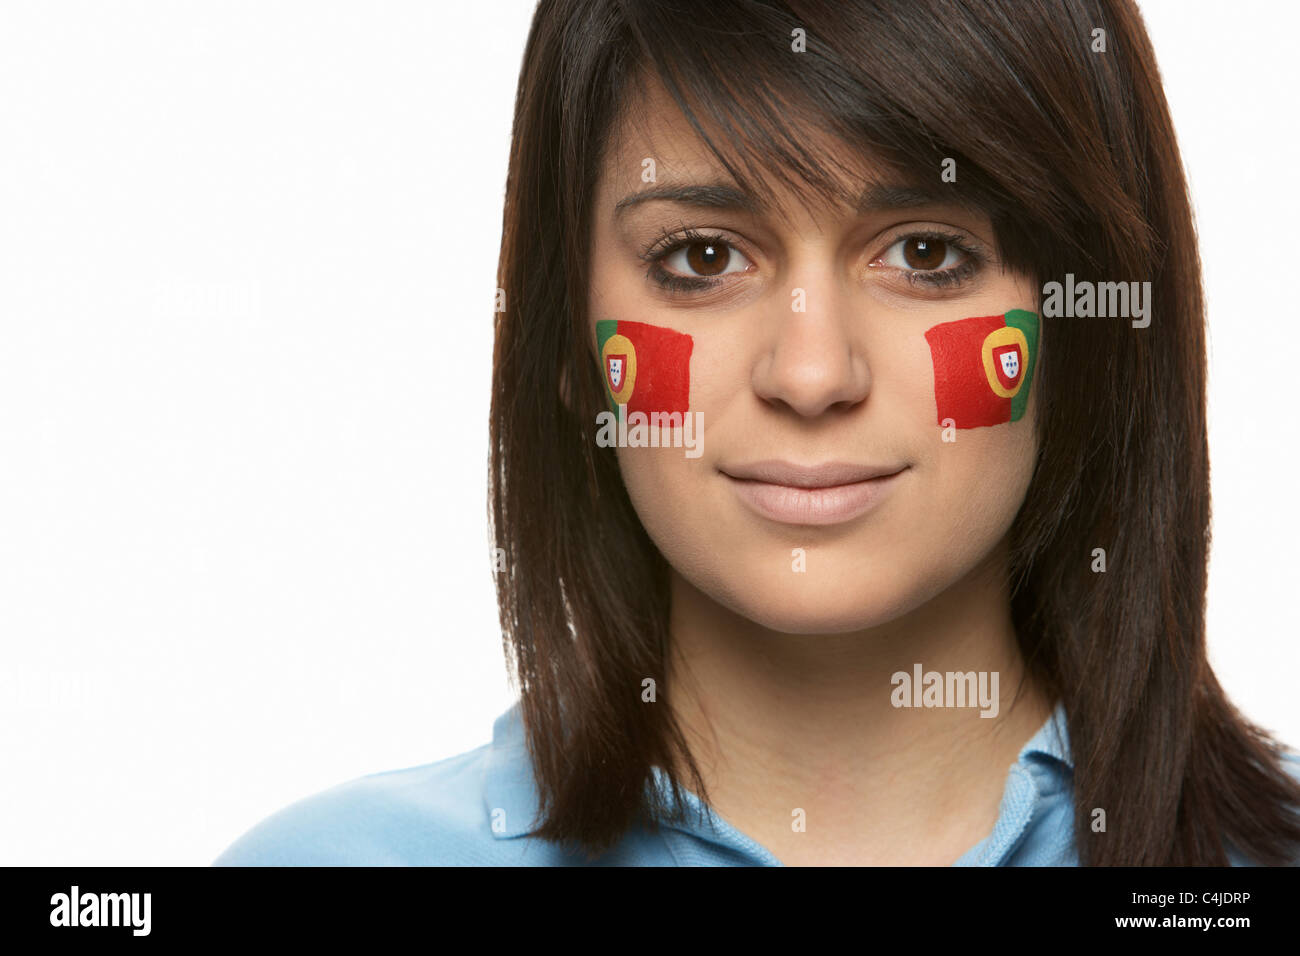 Young Female Sports Fan With Portugese Flag Painted On Face Stock Photo